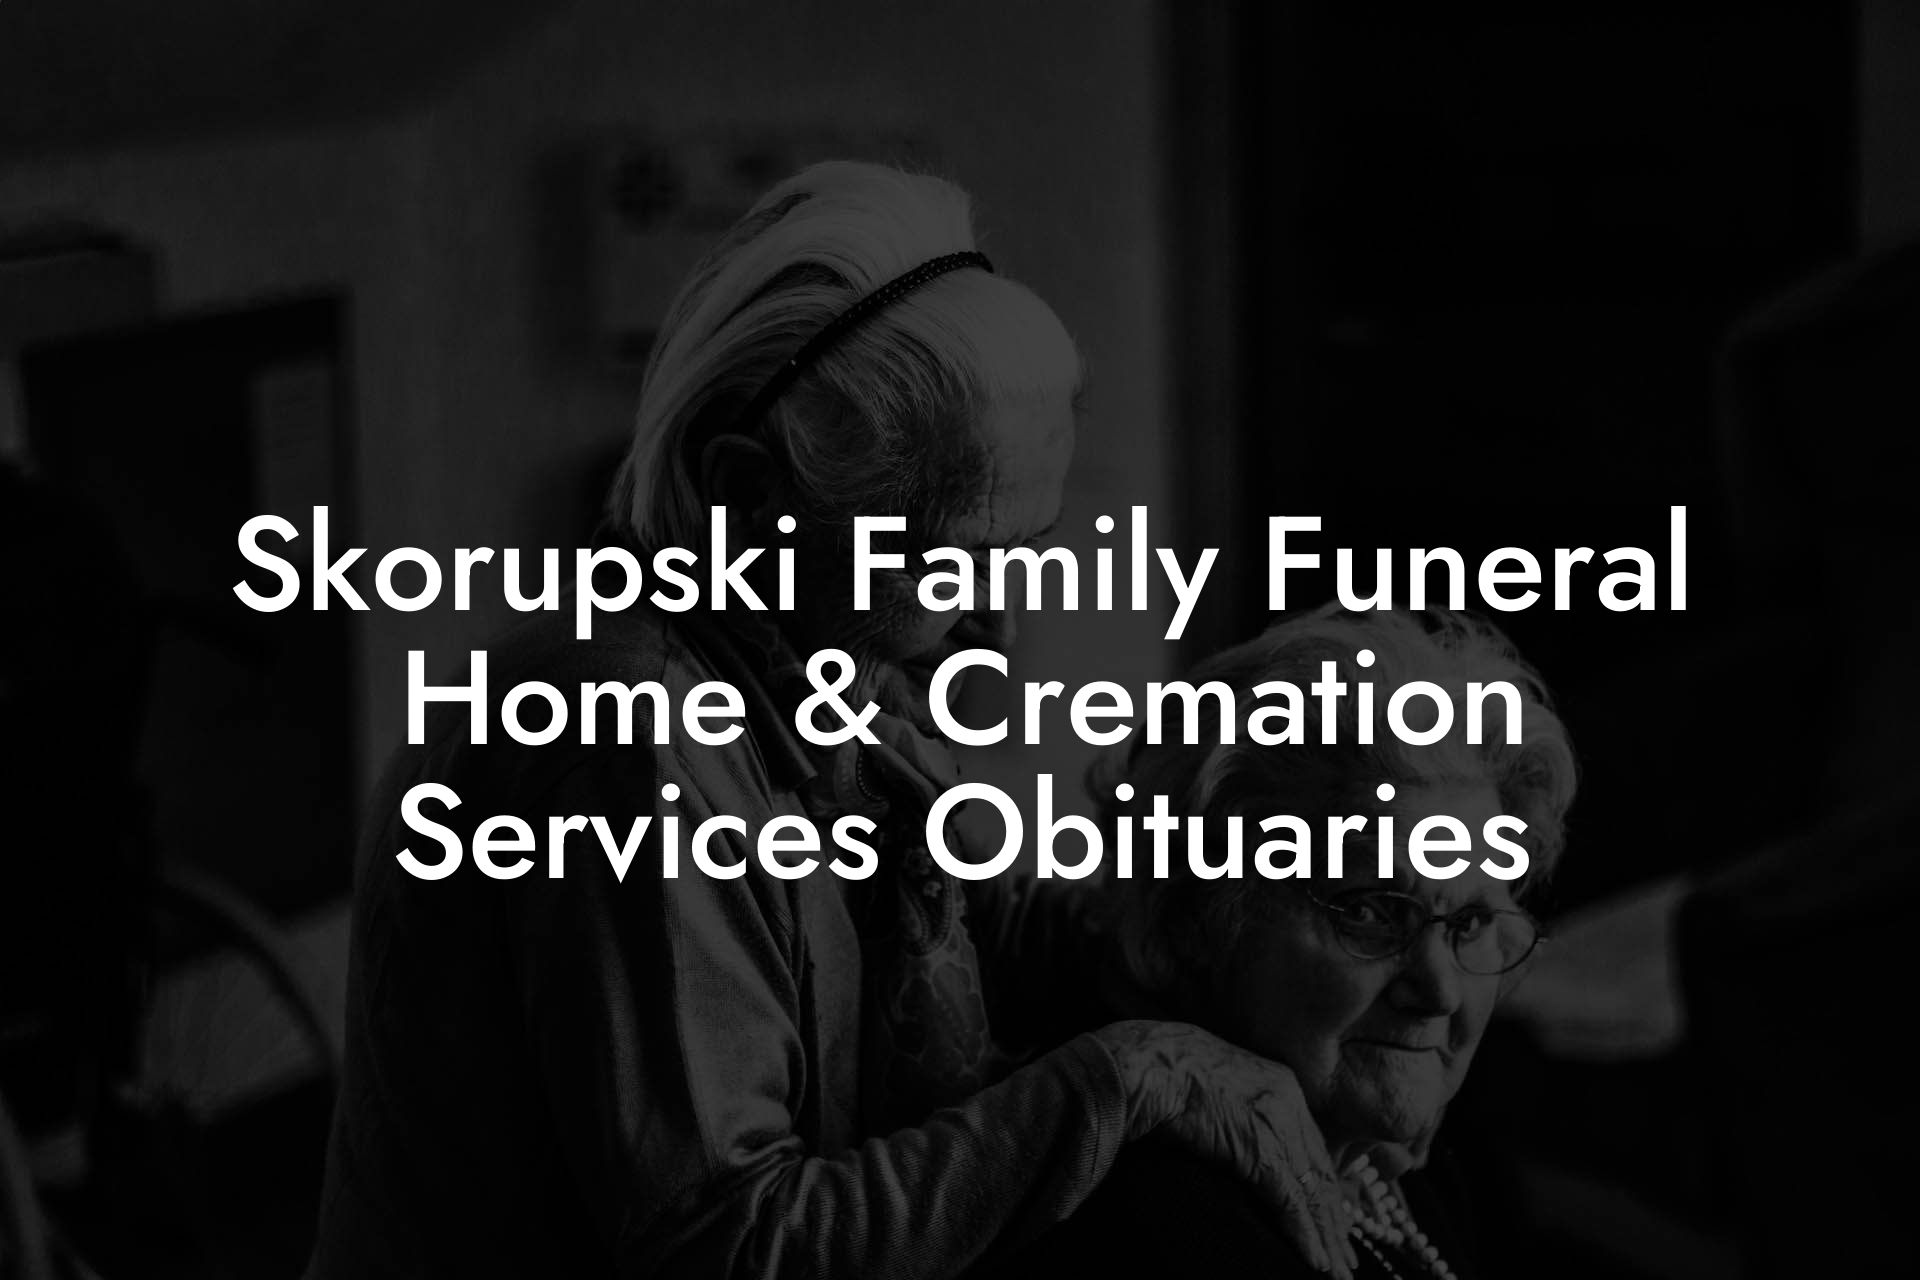 Skorupski Family Funeral Home & Cremation Services Obituaries